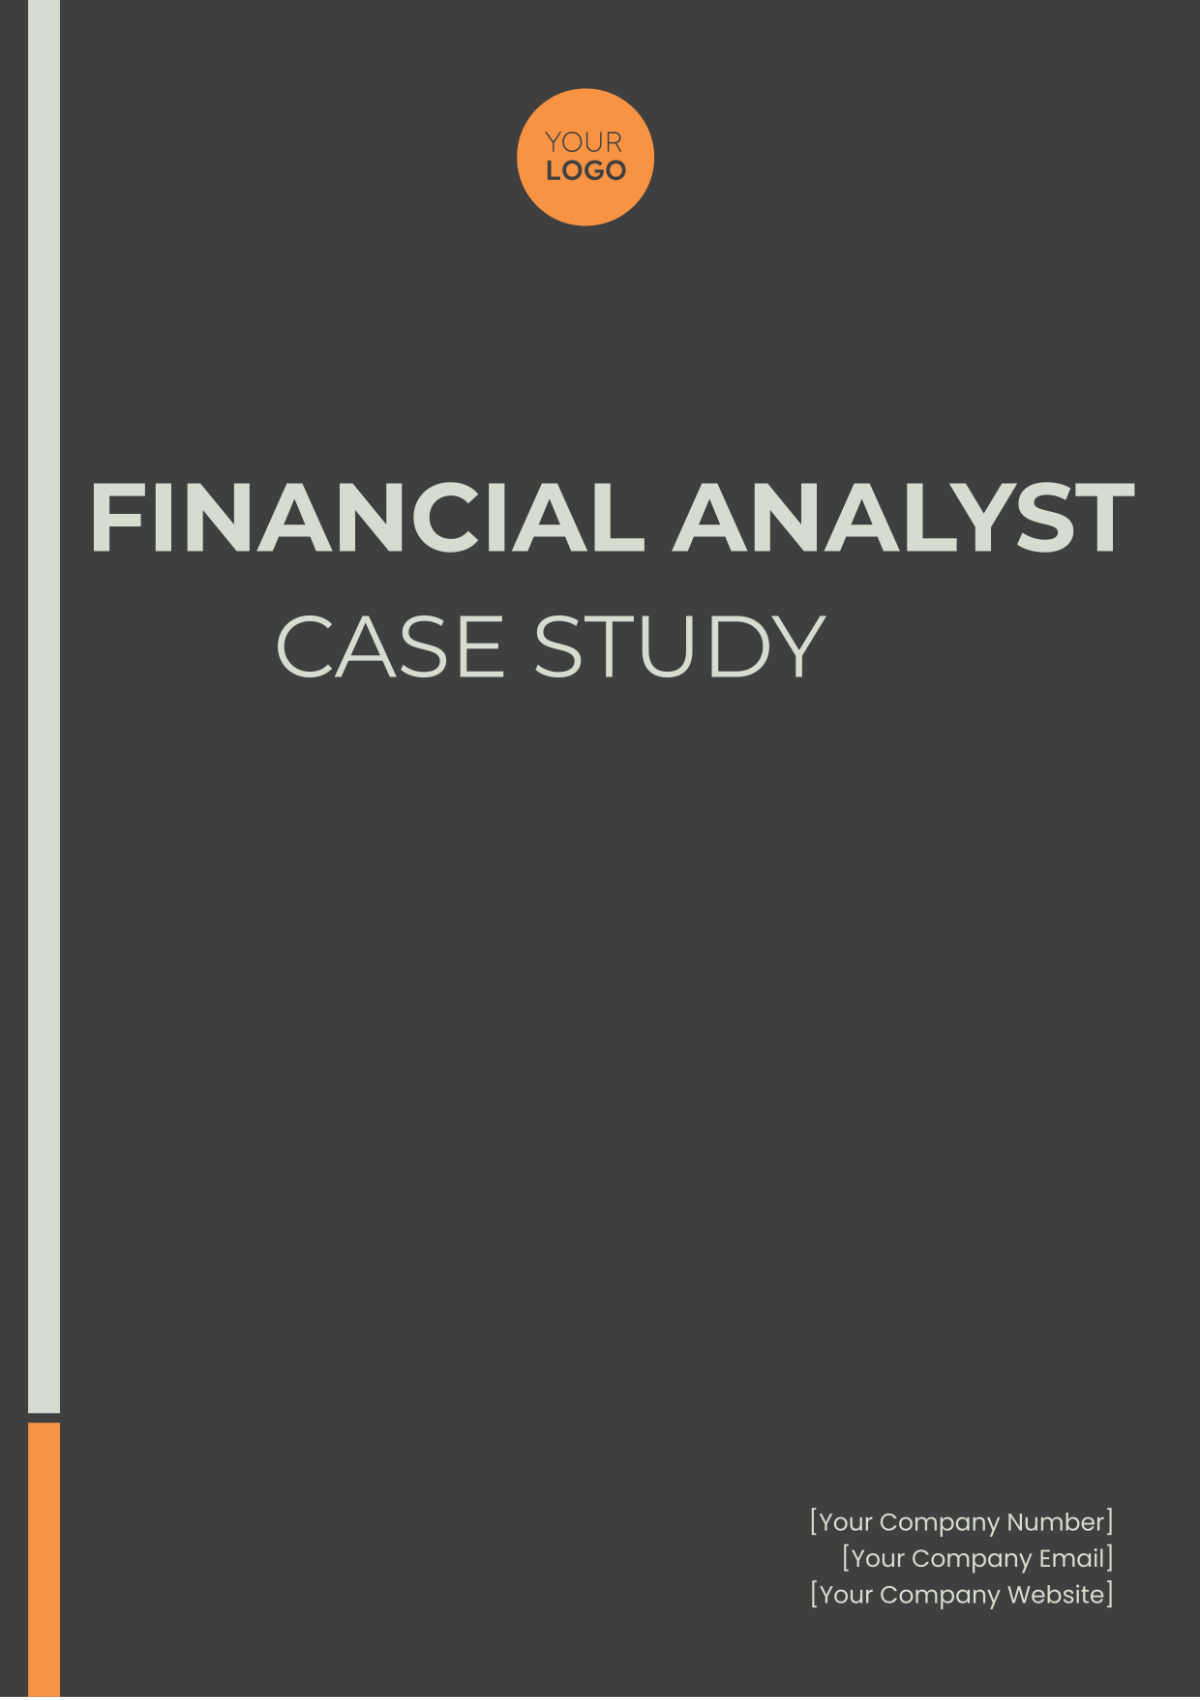 Financial Analyst Case Study Template